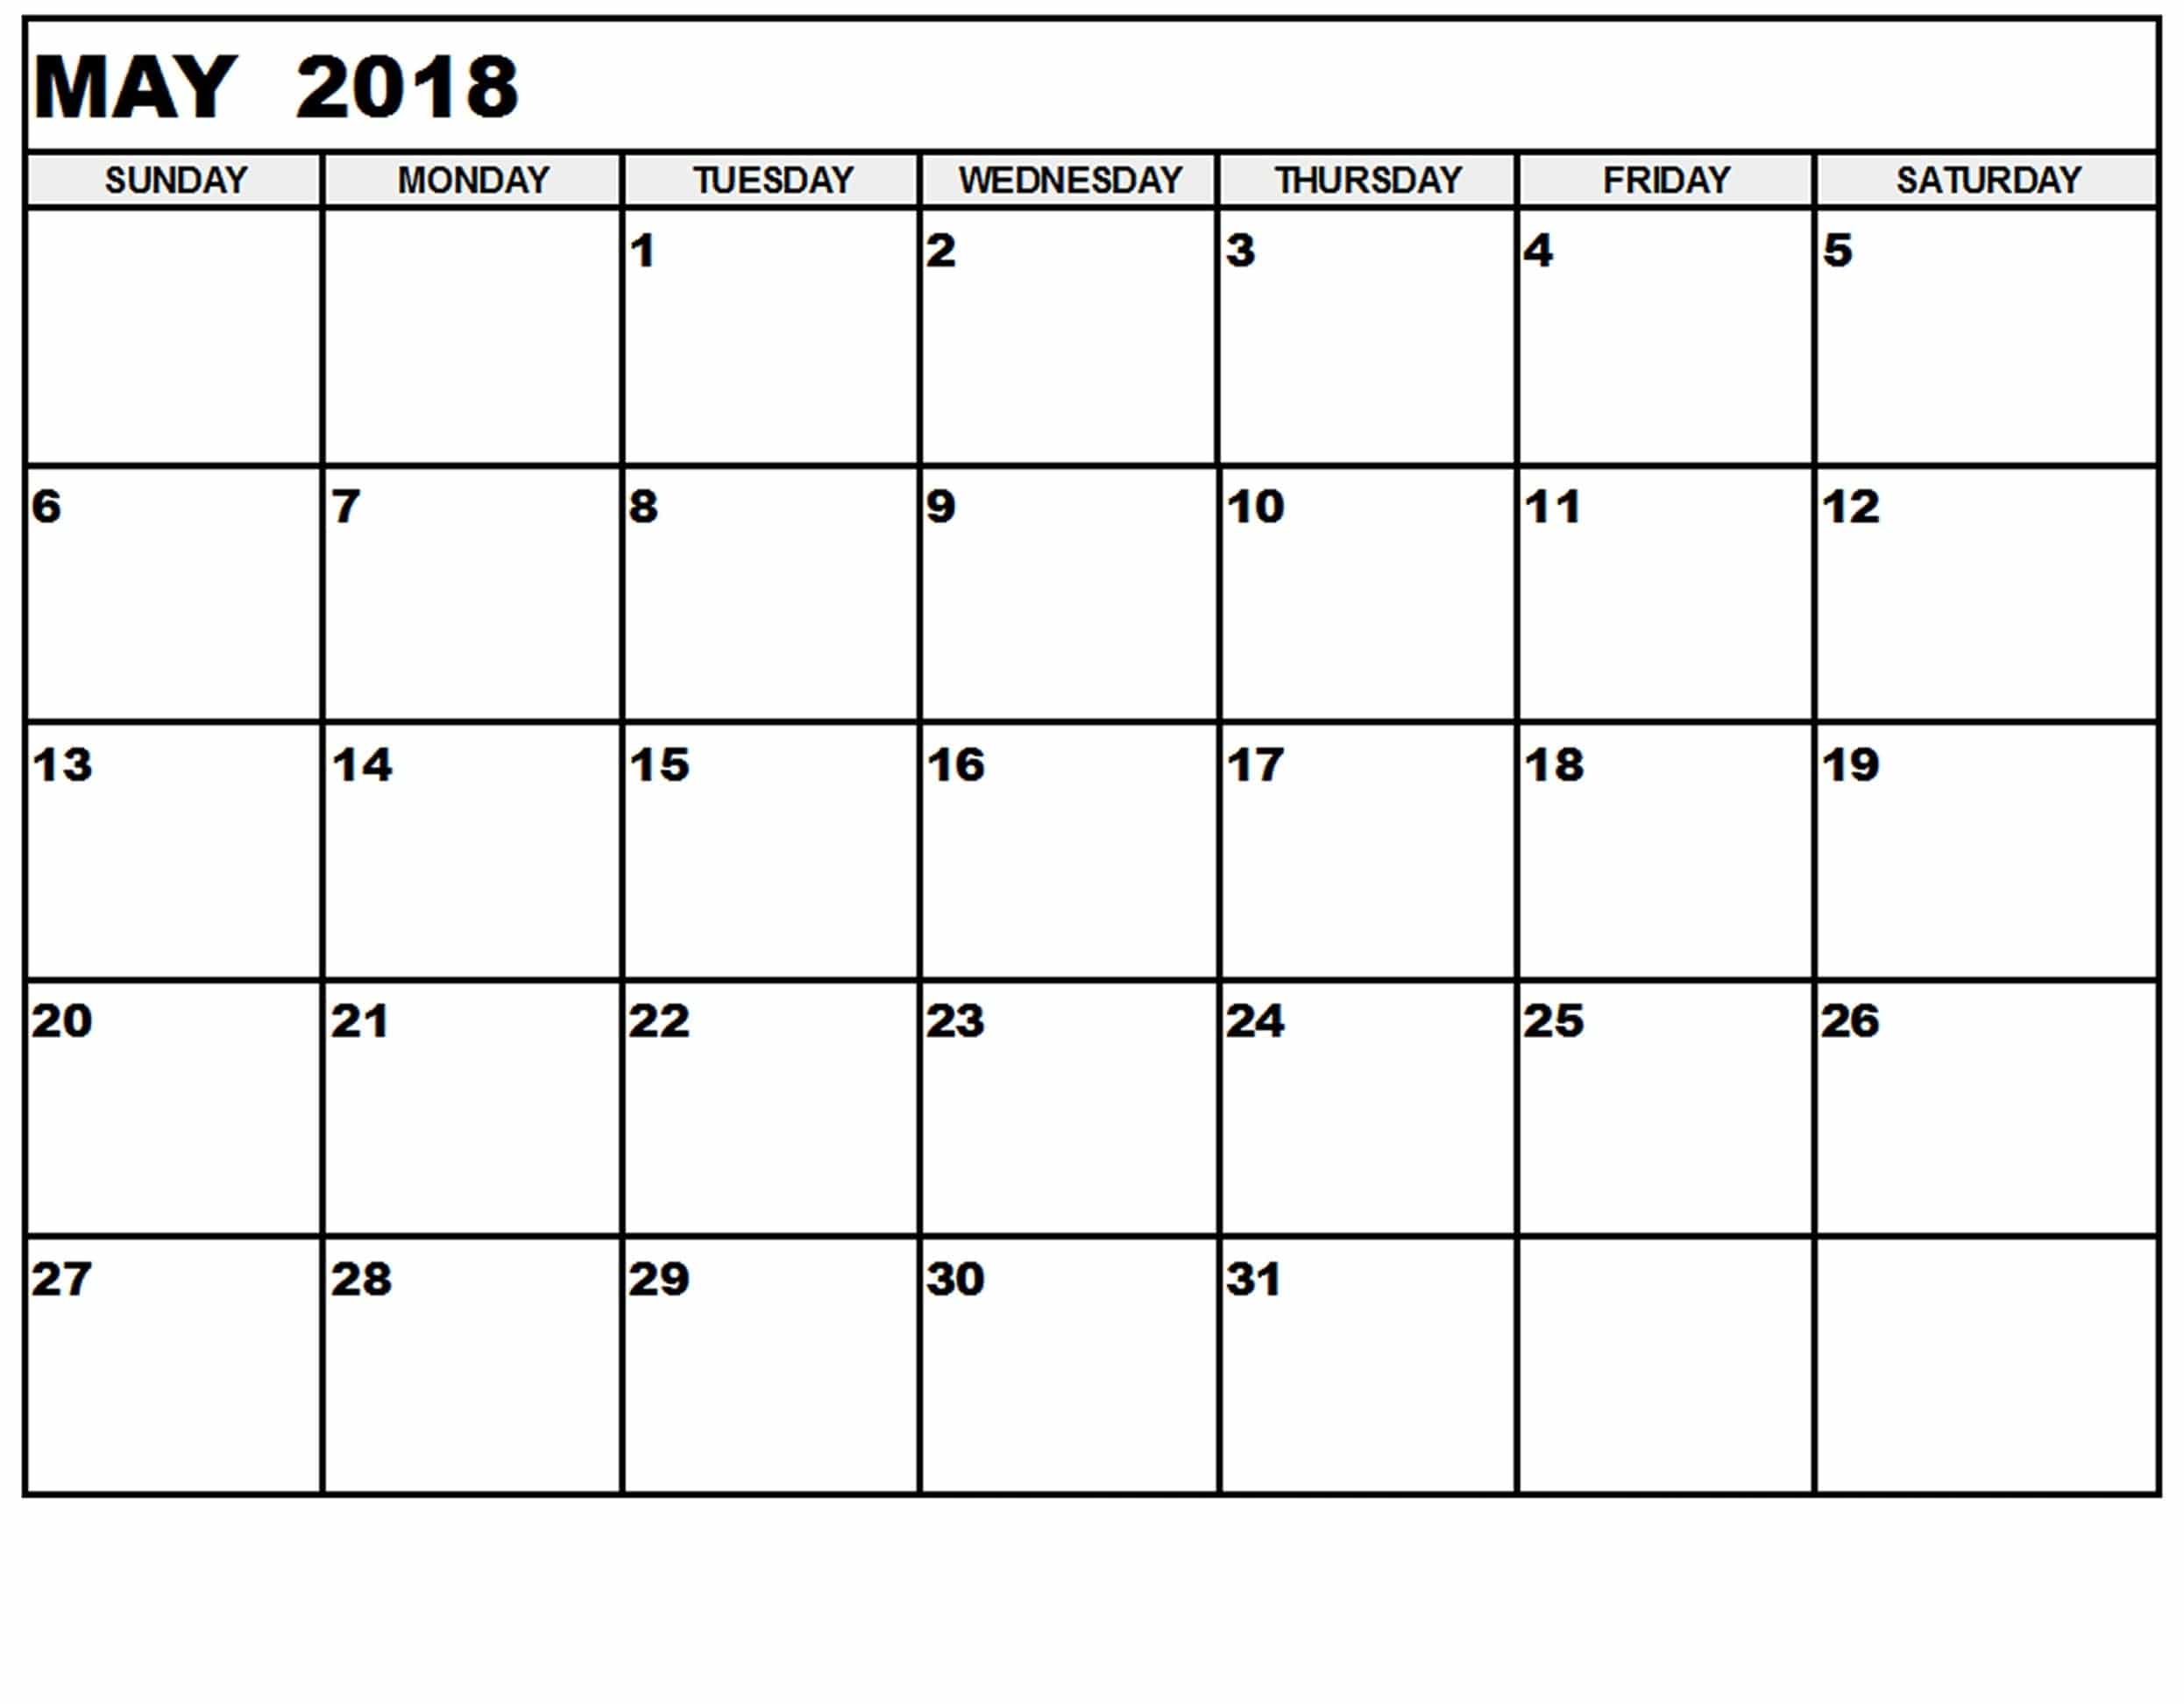 may-calendar-2018-printable-with-notes-oppidan-library